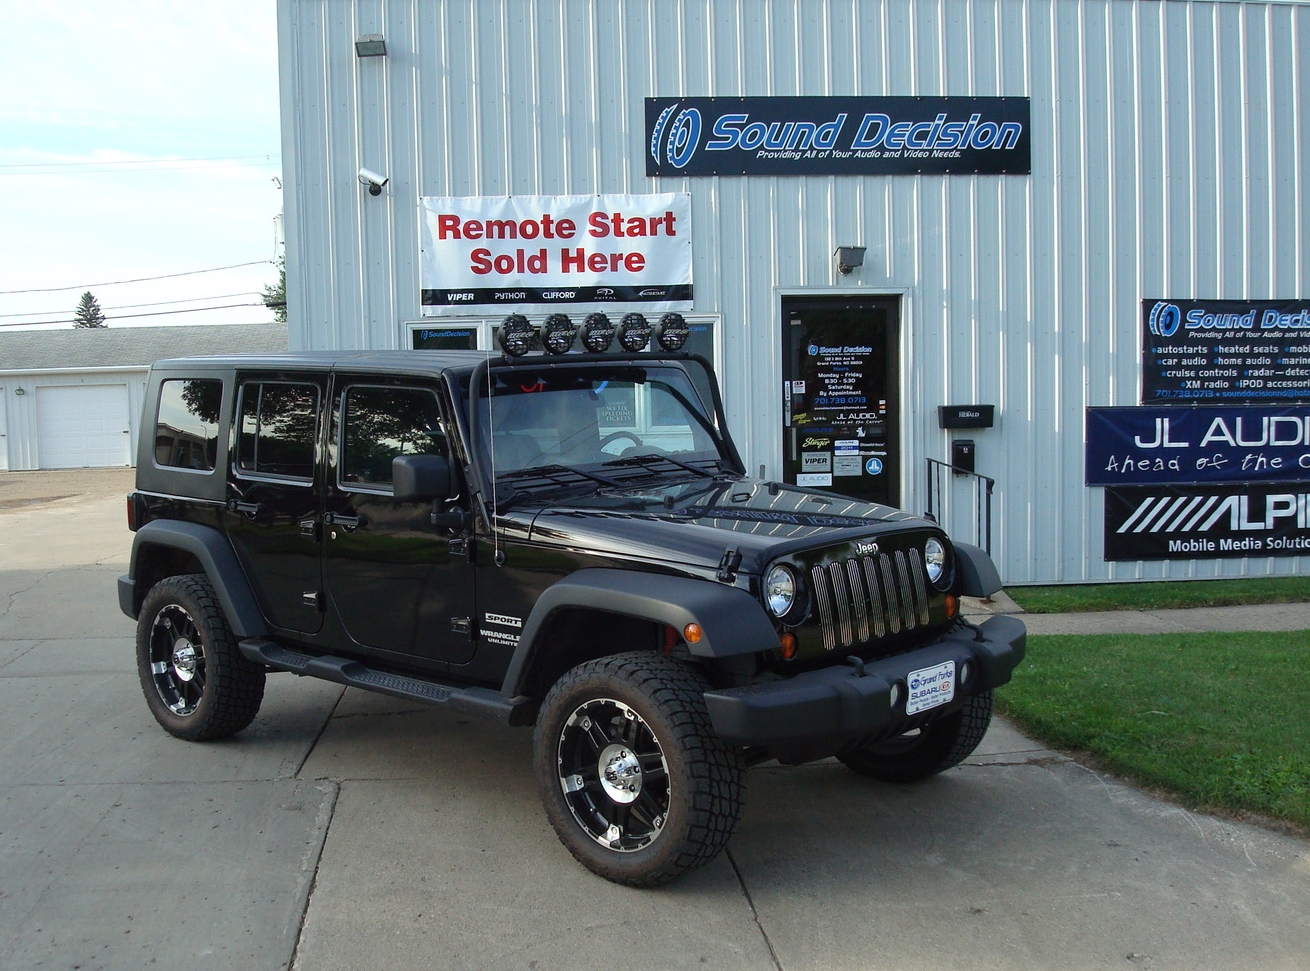 2010 Jeep Wrangler - Tower speakers added for radio station location broadcasts